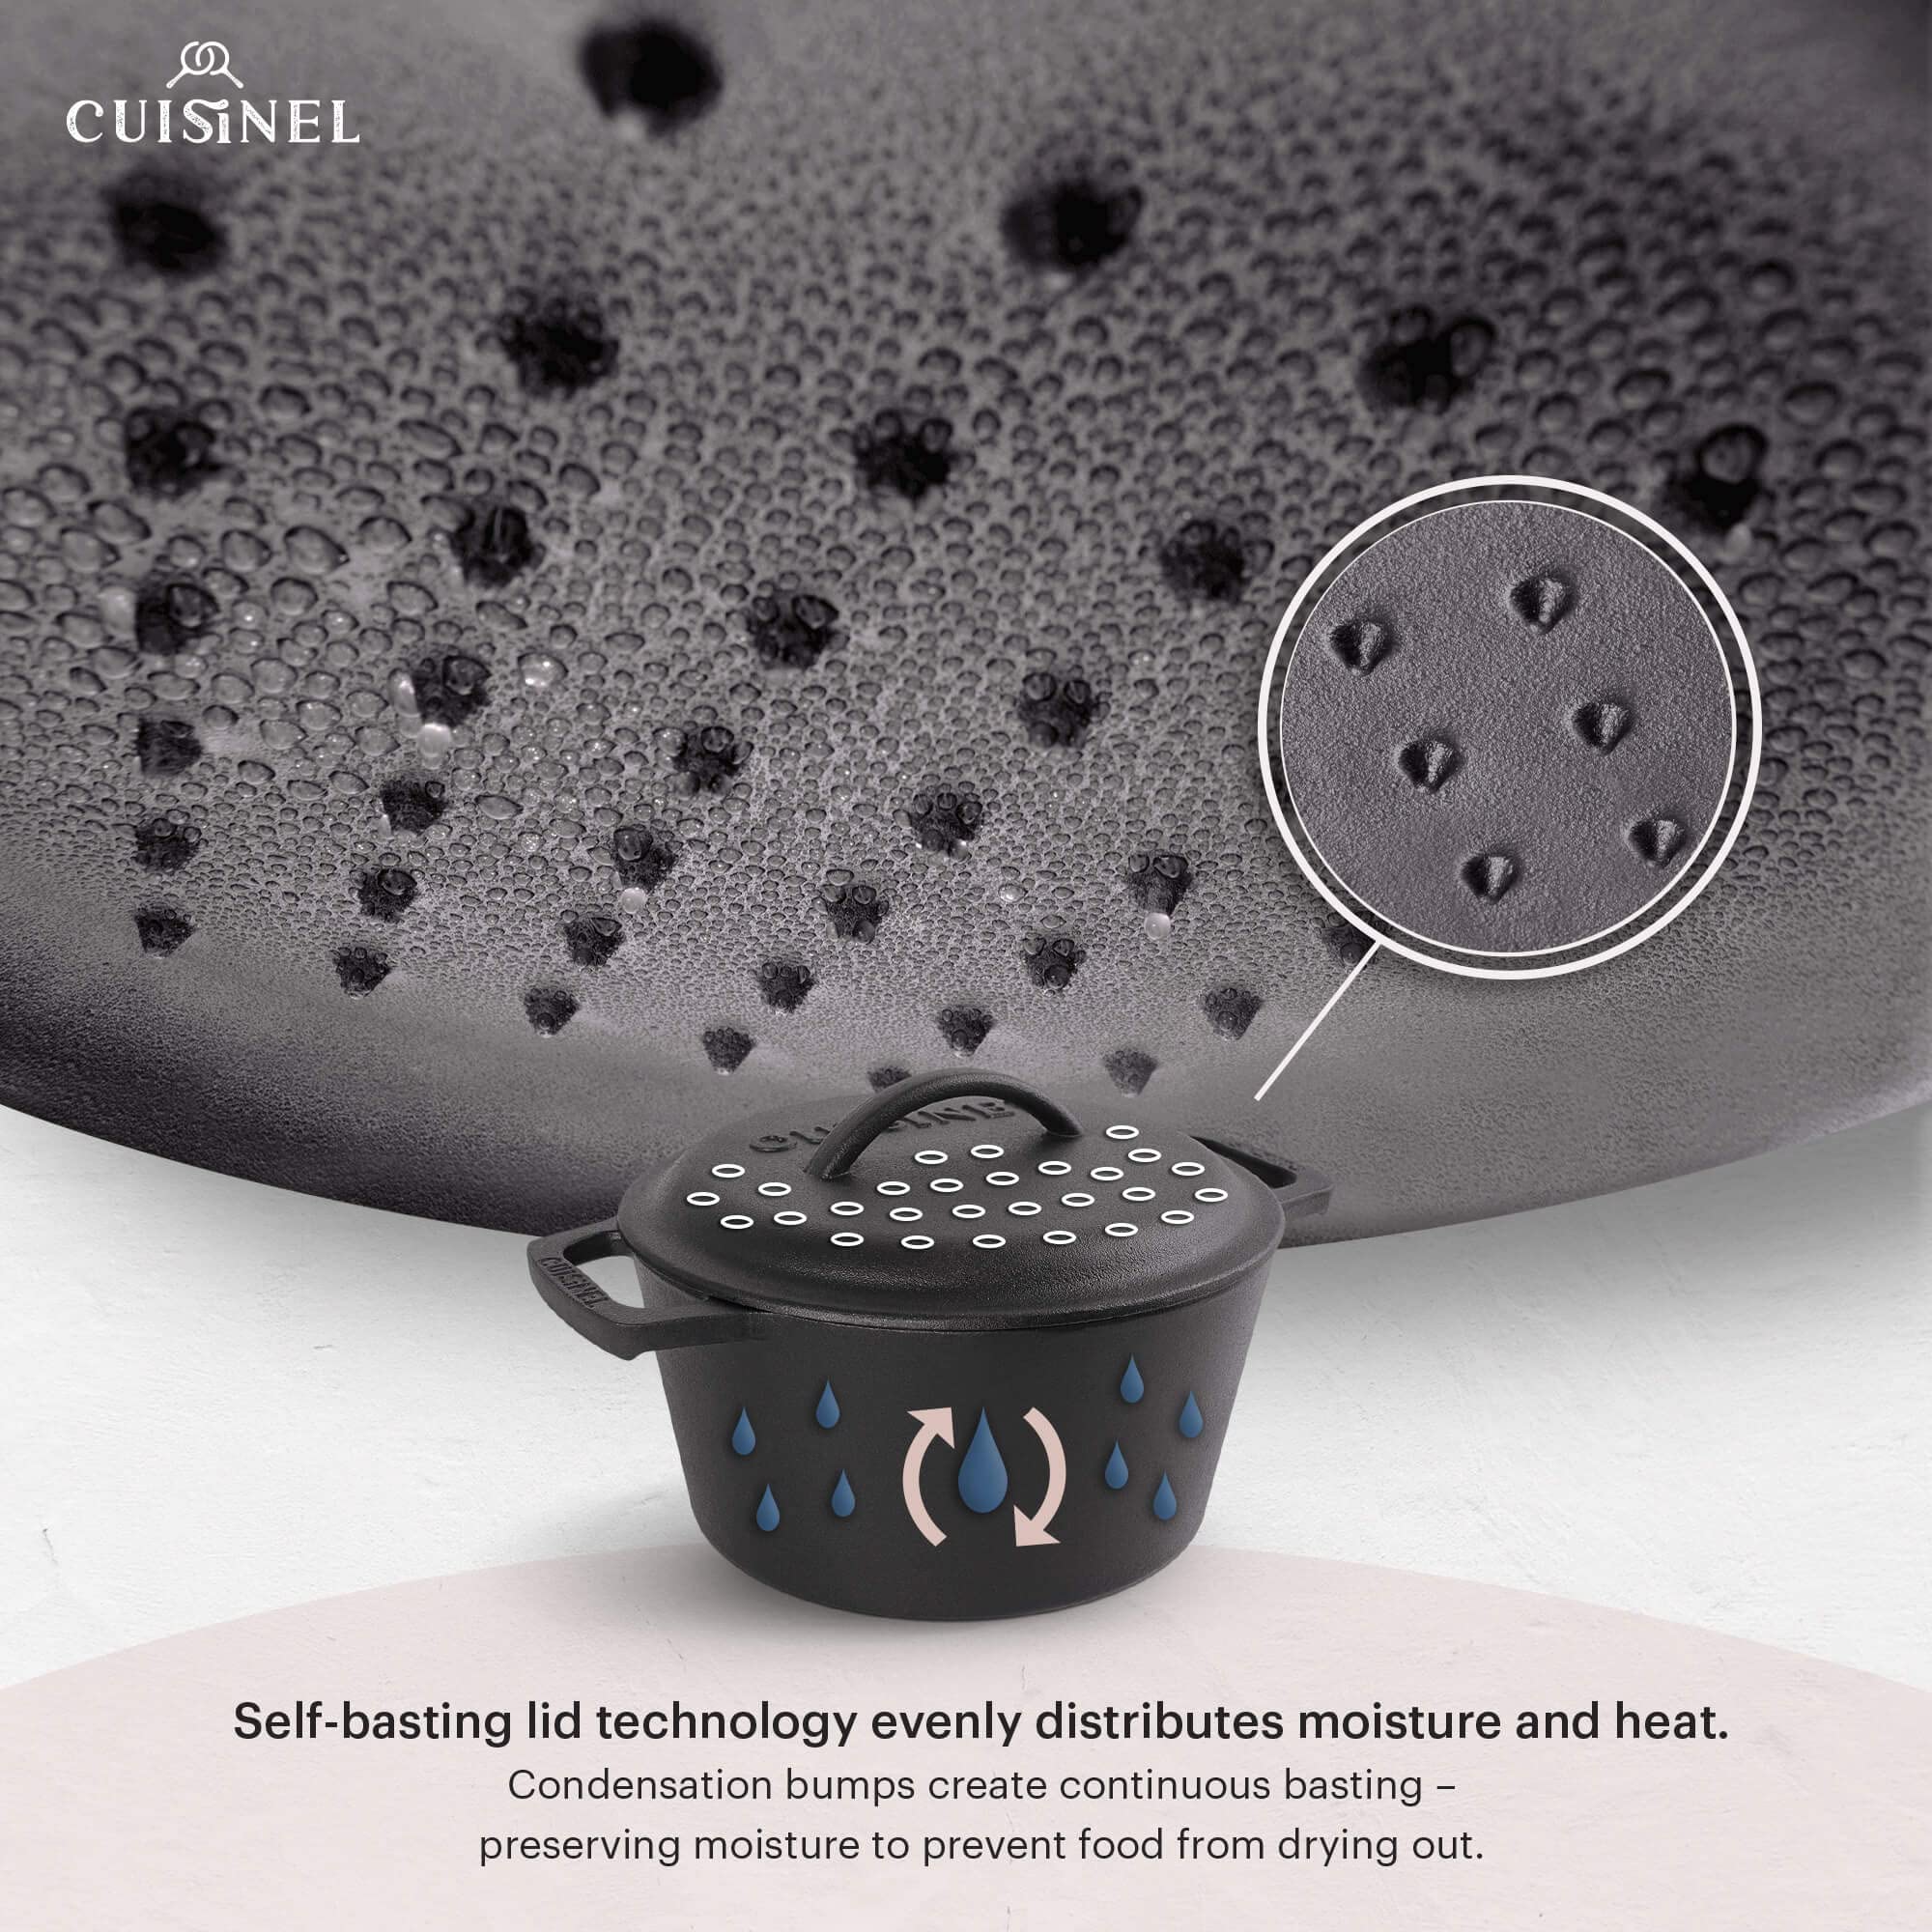 Cuisinel Cast Iron Dutch Oven/Combo Cooker + Silicone Handle Holder Covers + Pan Scraper/Cleaner - Pre-Seasoned Indoor/Outdoor Bread Baking Pot and Skillet Frying Pan - Kitchen Cookware  - Like New